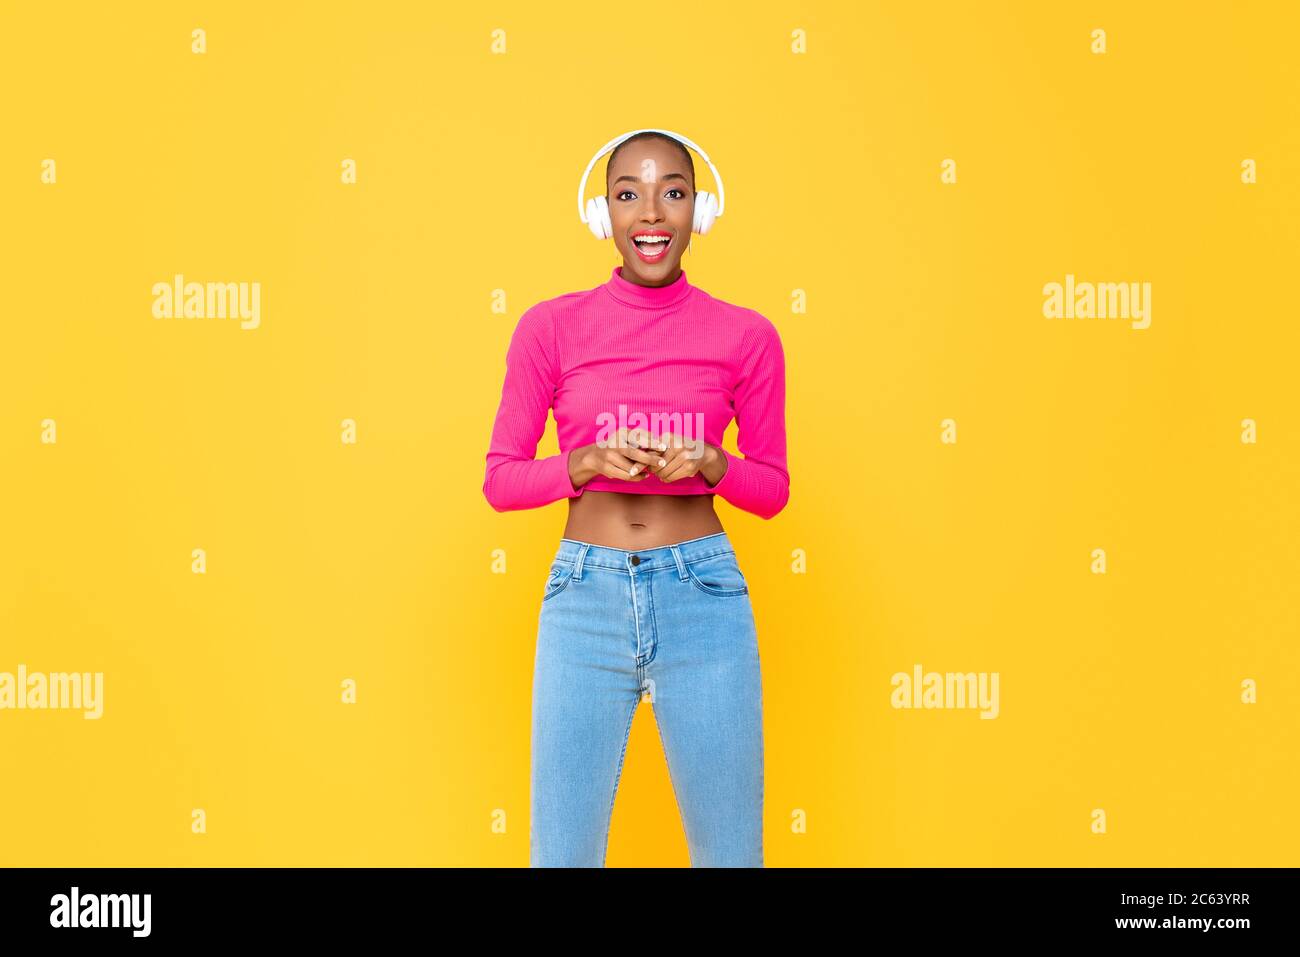 Fashionable African American woman with headphones smiling on colorful yellow isolated studio background Stock Photo